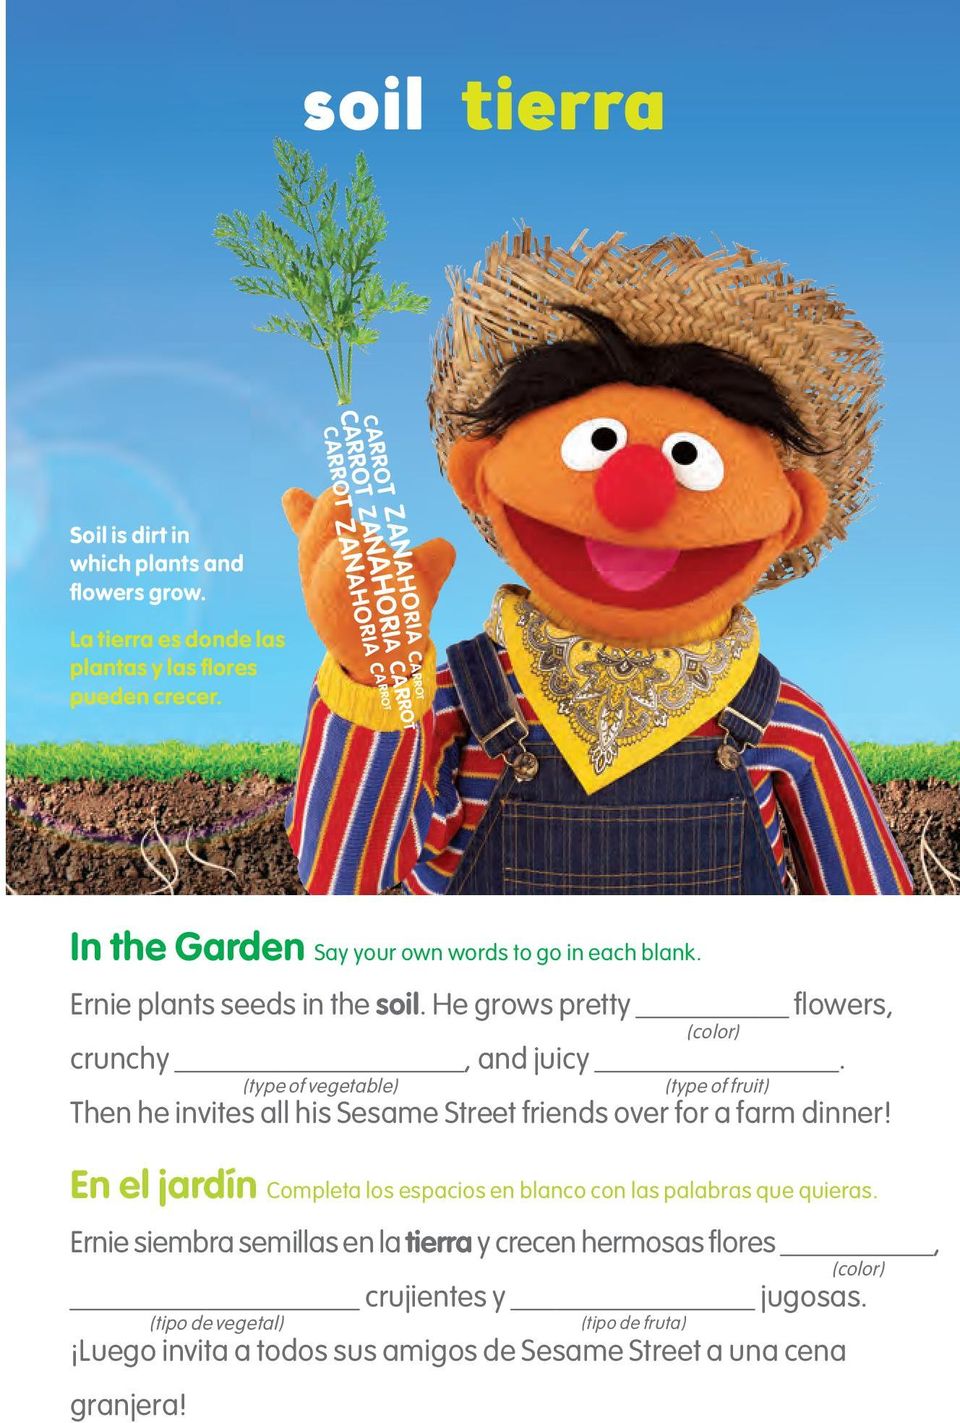 He grows pretty flowers, crunchy, and juicy. Then he invites all his Sesame Street friends over for a farm dinner!